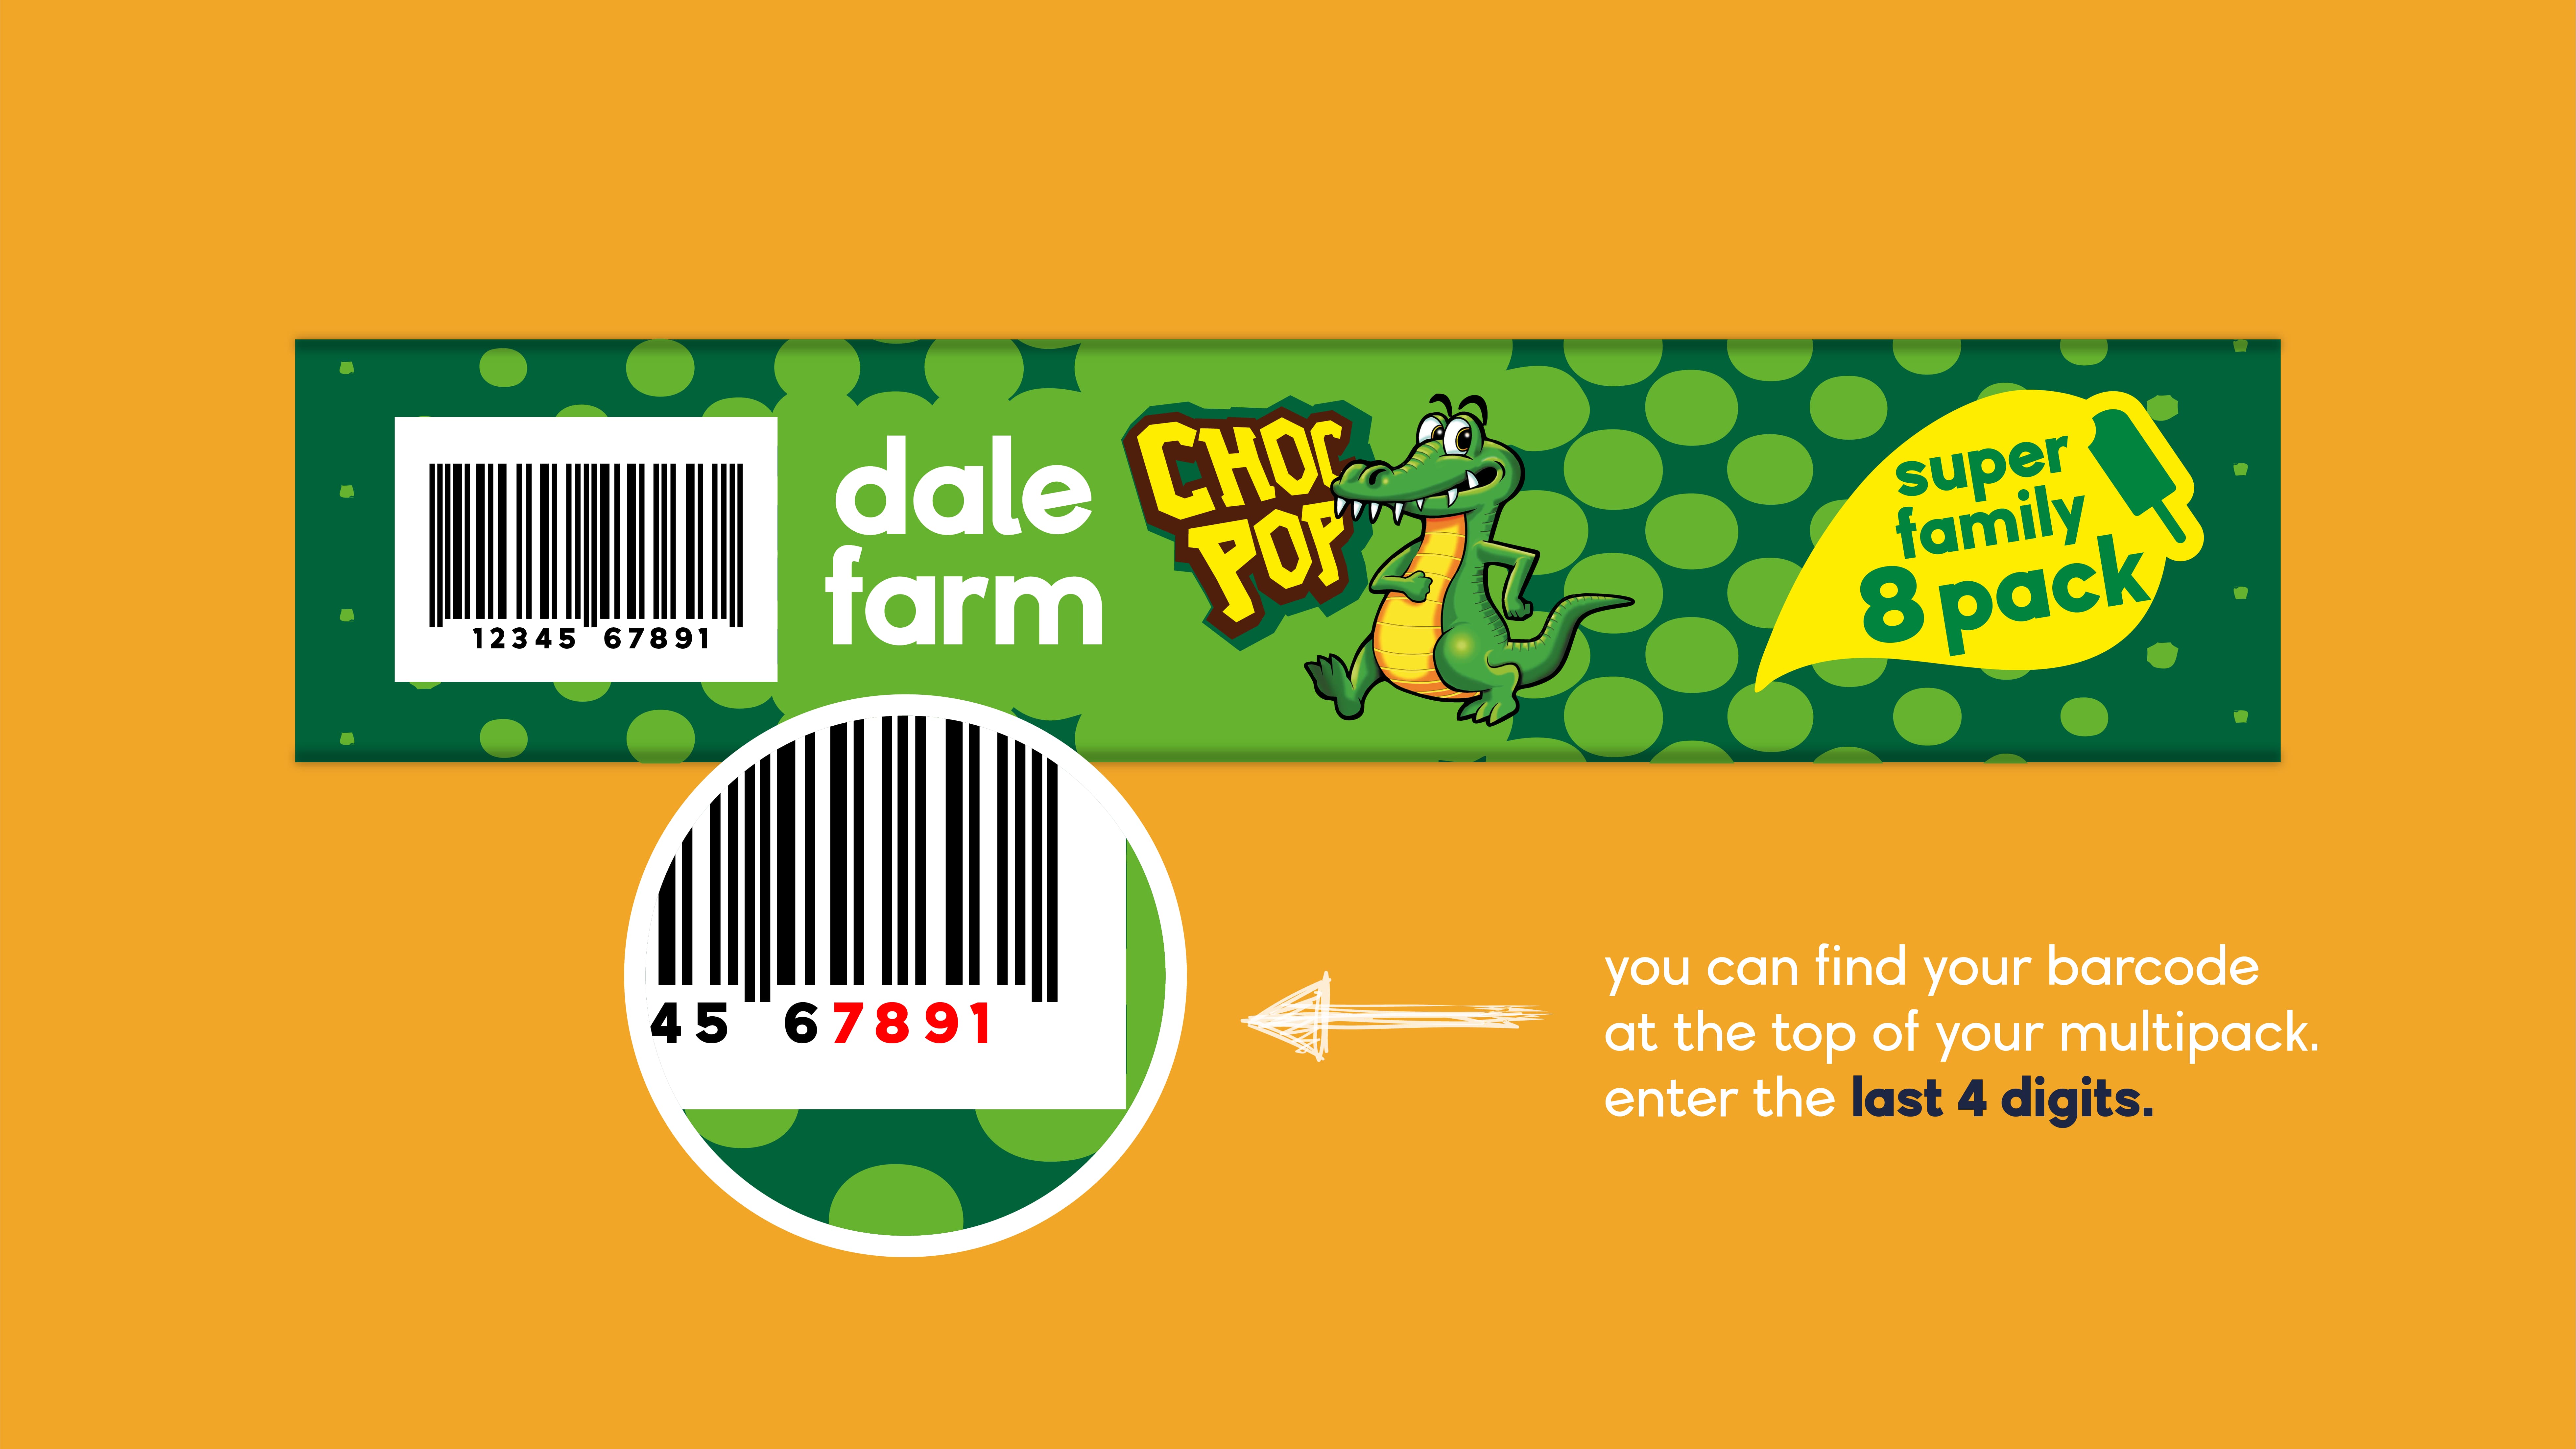 you can find your barcode at the top of your multipack. Enter the last 4 digits. 